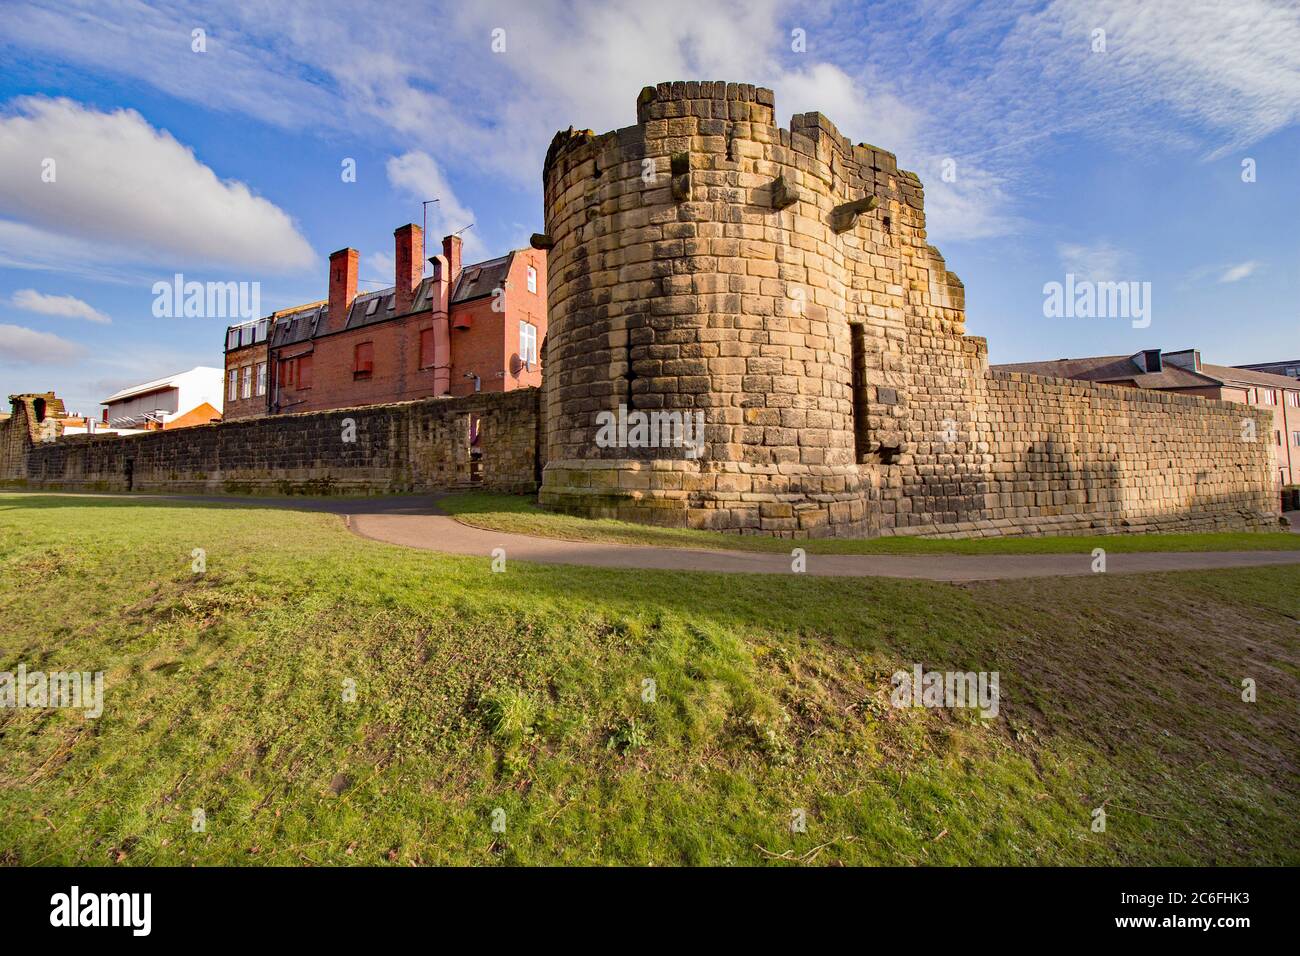 Newcastle Upon Tyne’s medieval castle walls that surround the city and image is taken from the moat on the outer side Stock Photo